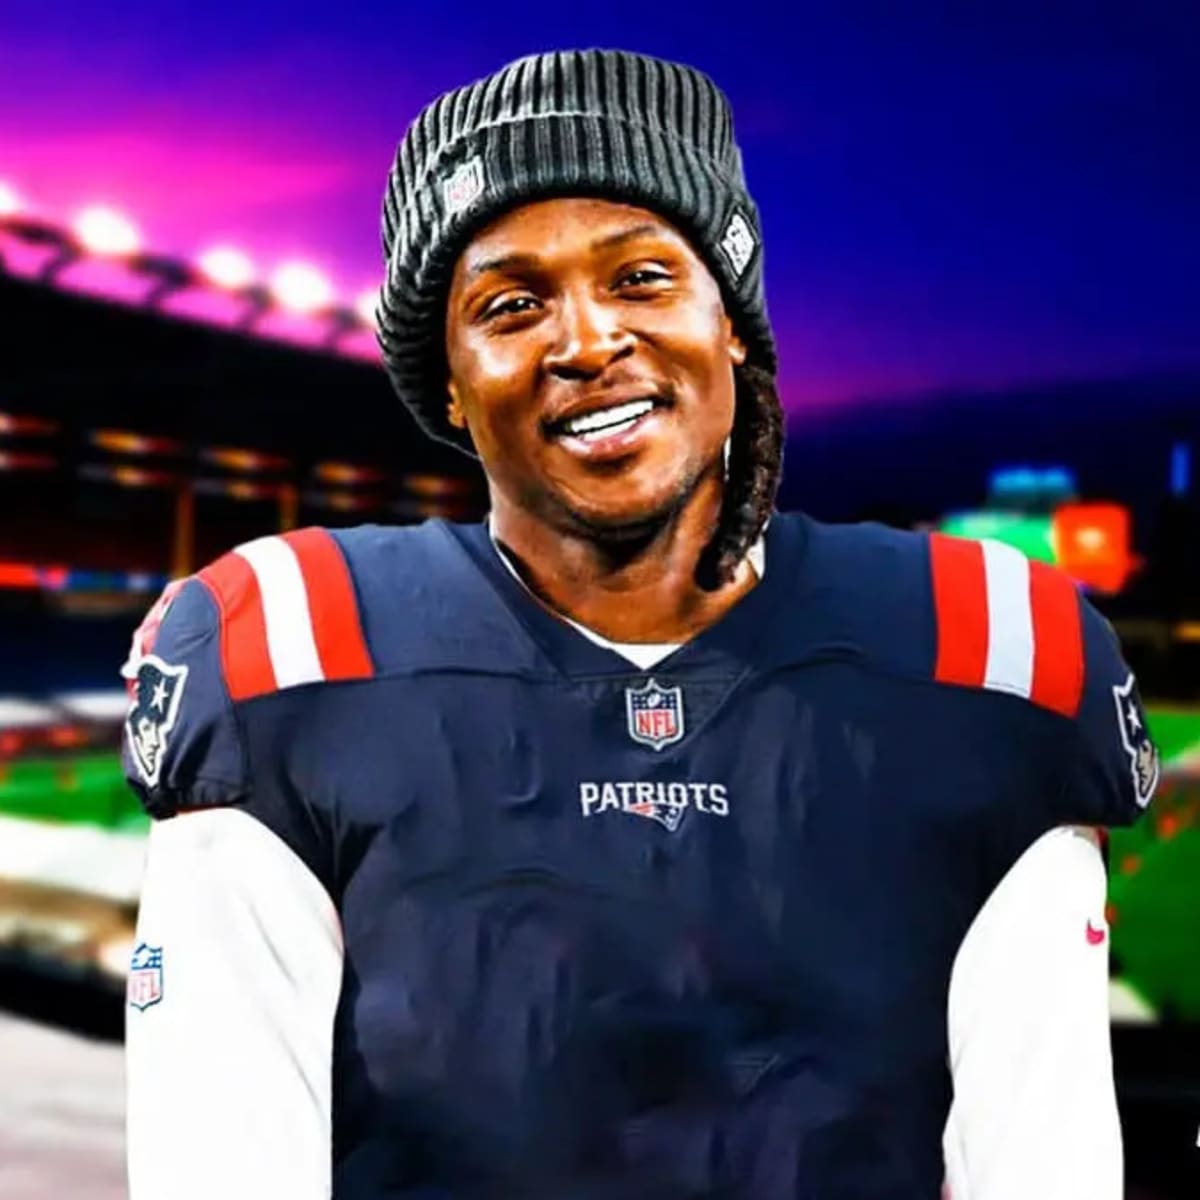 NFL WR Rankings Show New England Patriots Need for DeAndre Hopkins